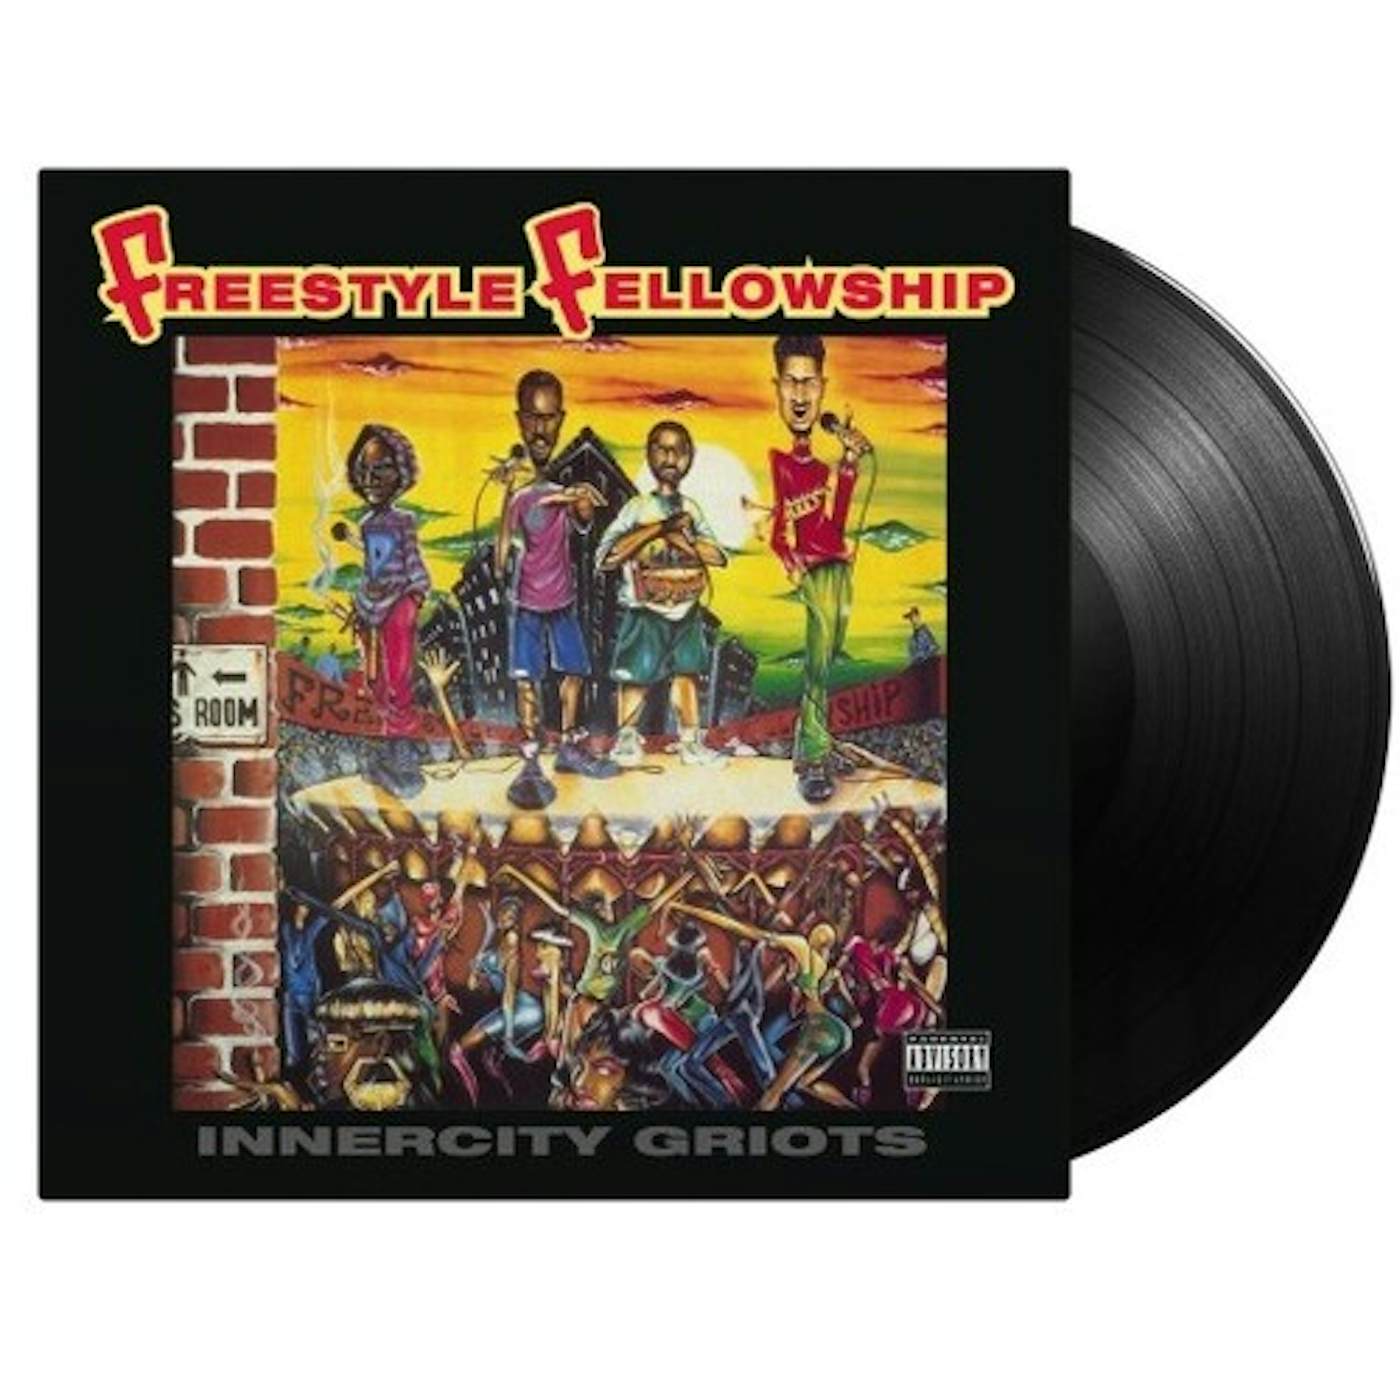 Freestyle Fellowship INNERCITY GRIOTS Vinyl Record